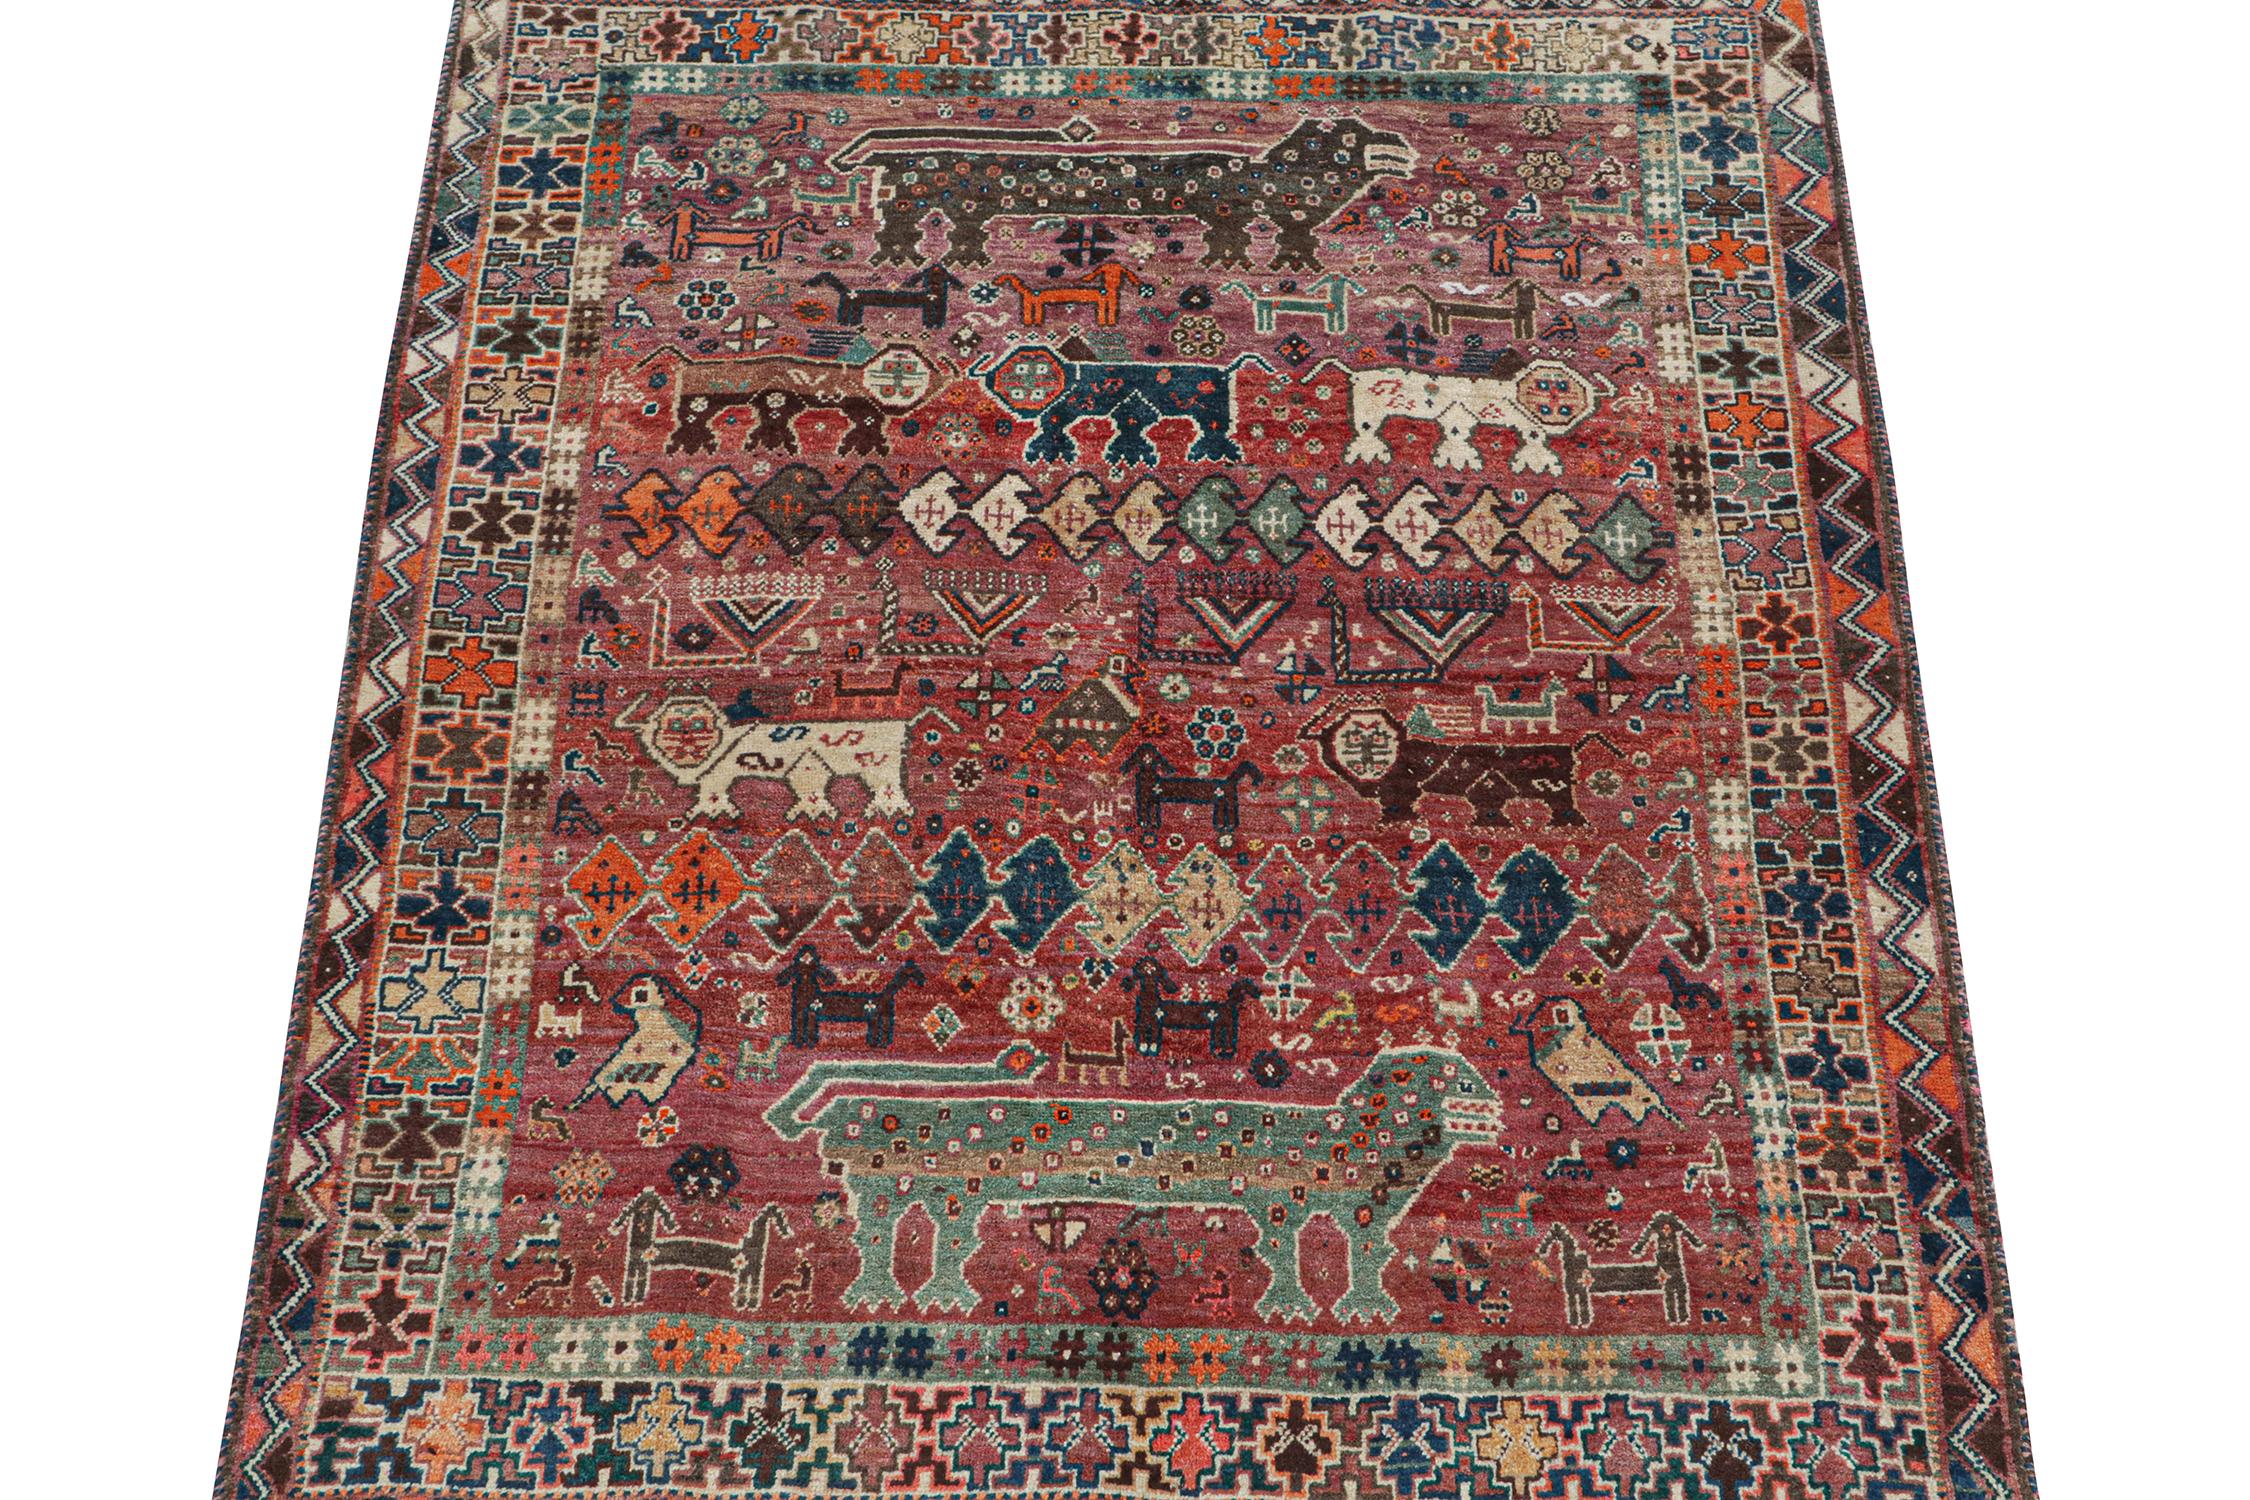 This vintage 5x6 Persian rug is a rare mid-century Gabbeh piece that originates from the Qashqai tribe. 

Hand-knotted in wool circa 1950-1960, its design plays medallion and all-over pattern style together in a bold tribal fashion.

The upper